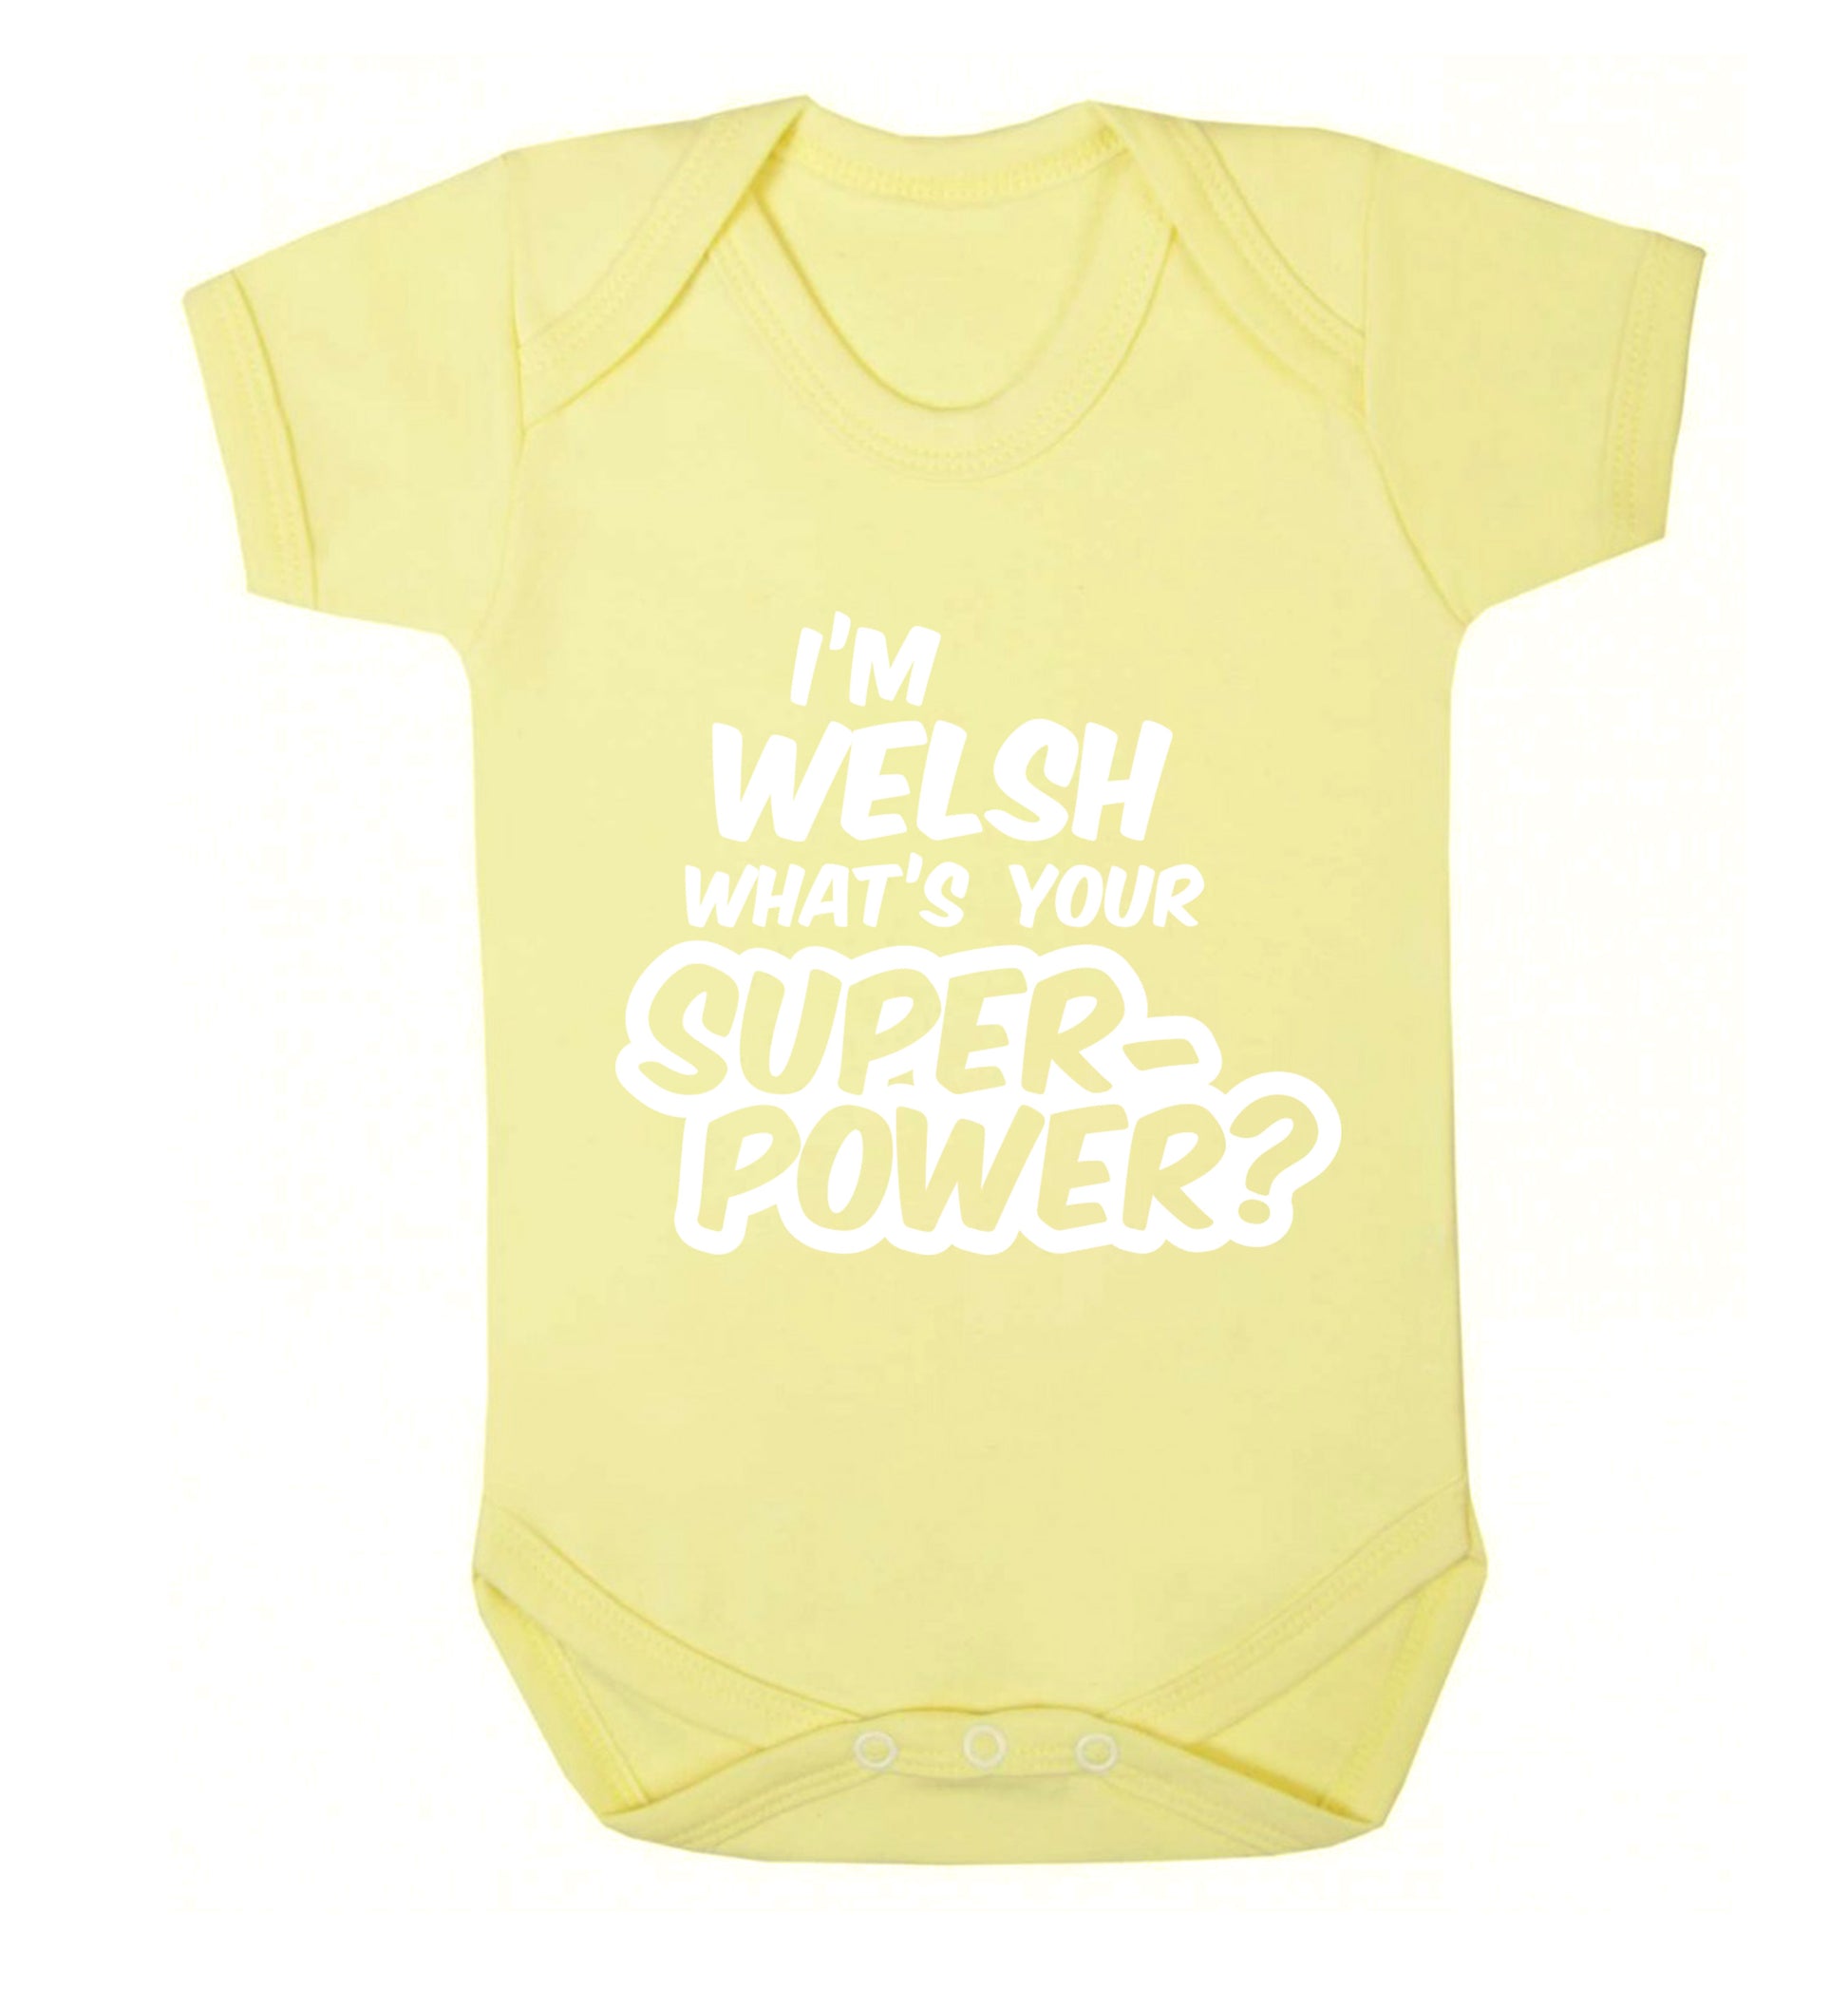 I'm Welsh what's your superpower? Baby Vest pale yellow 18-24 months